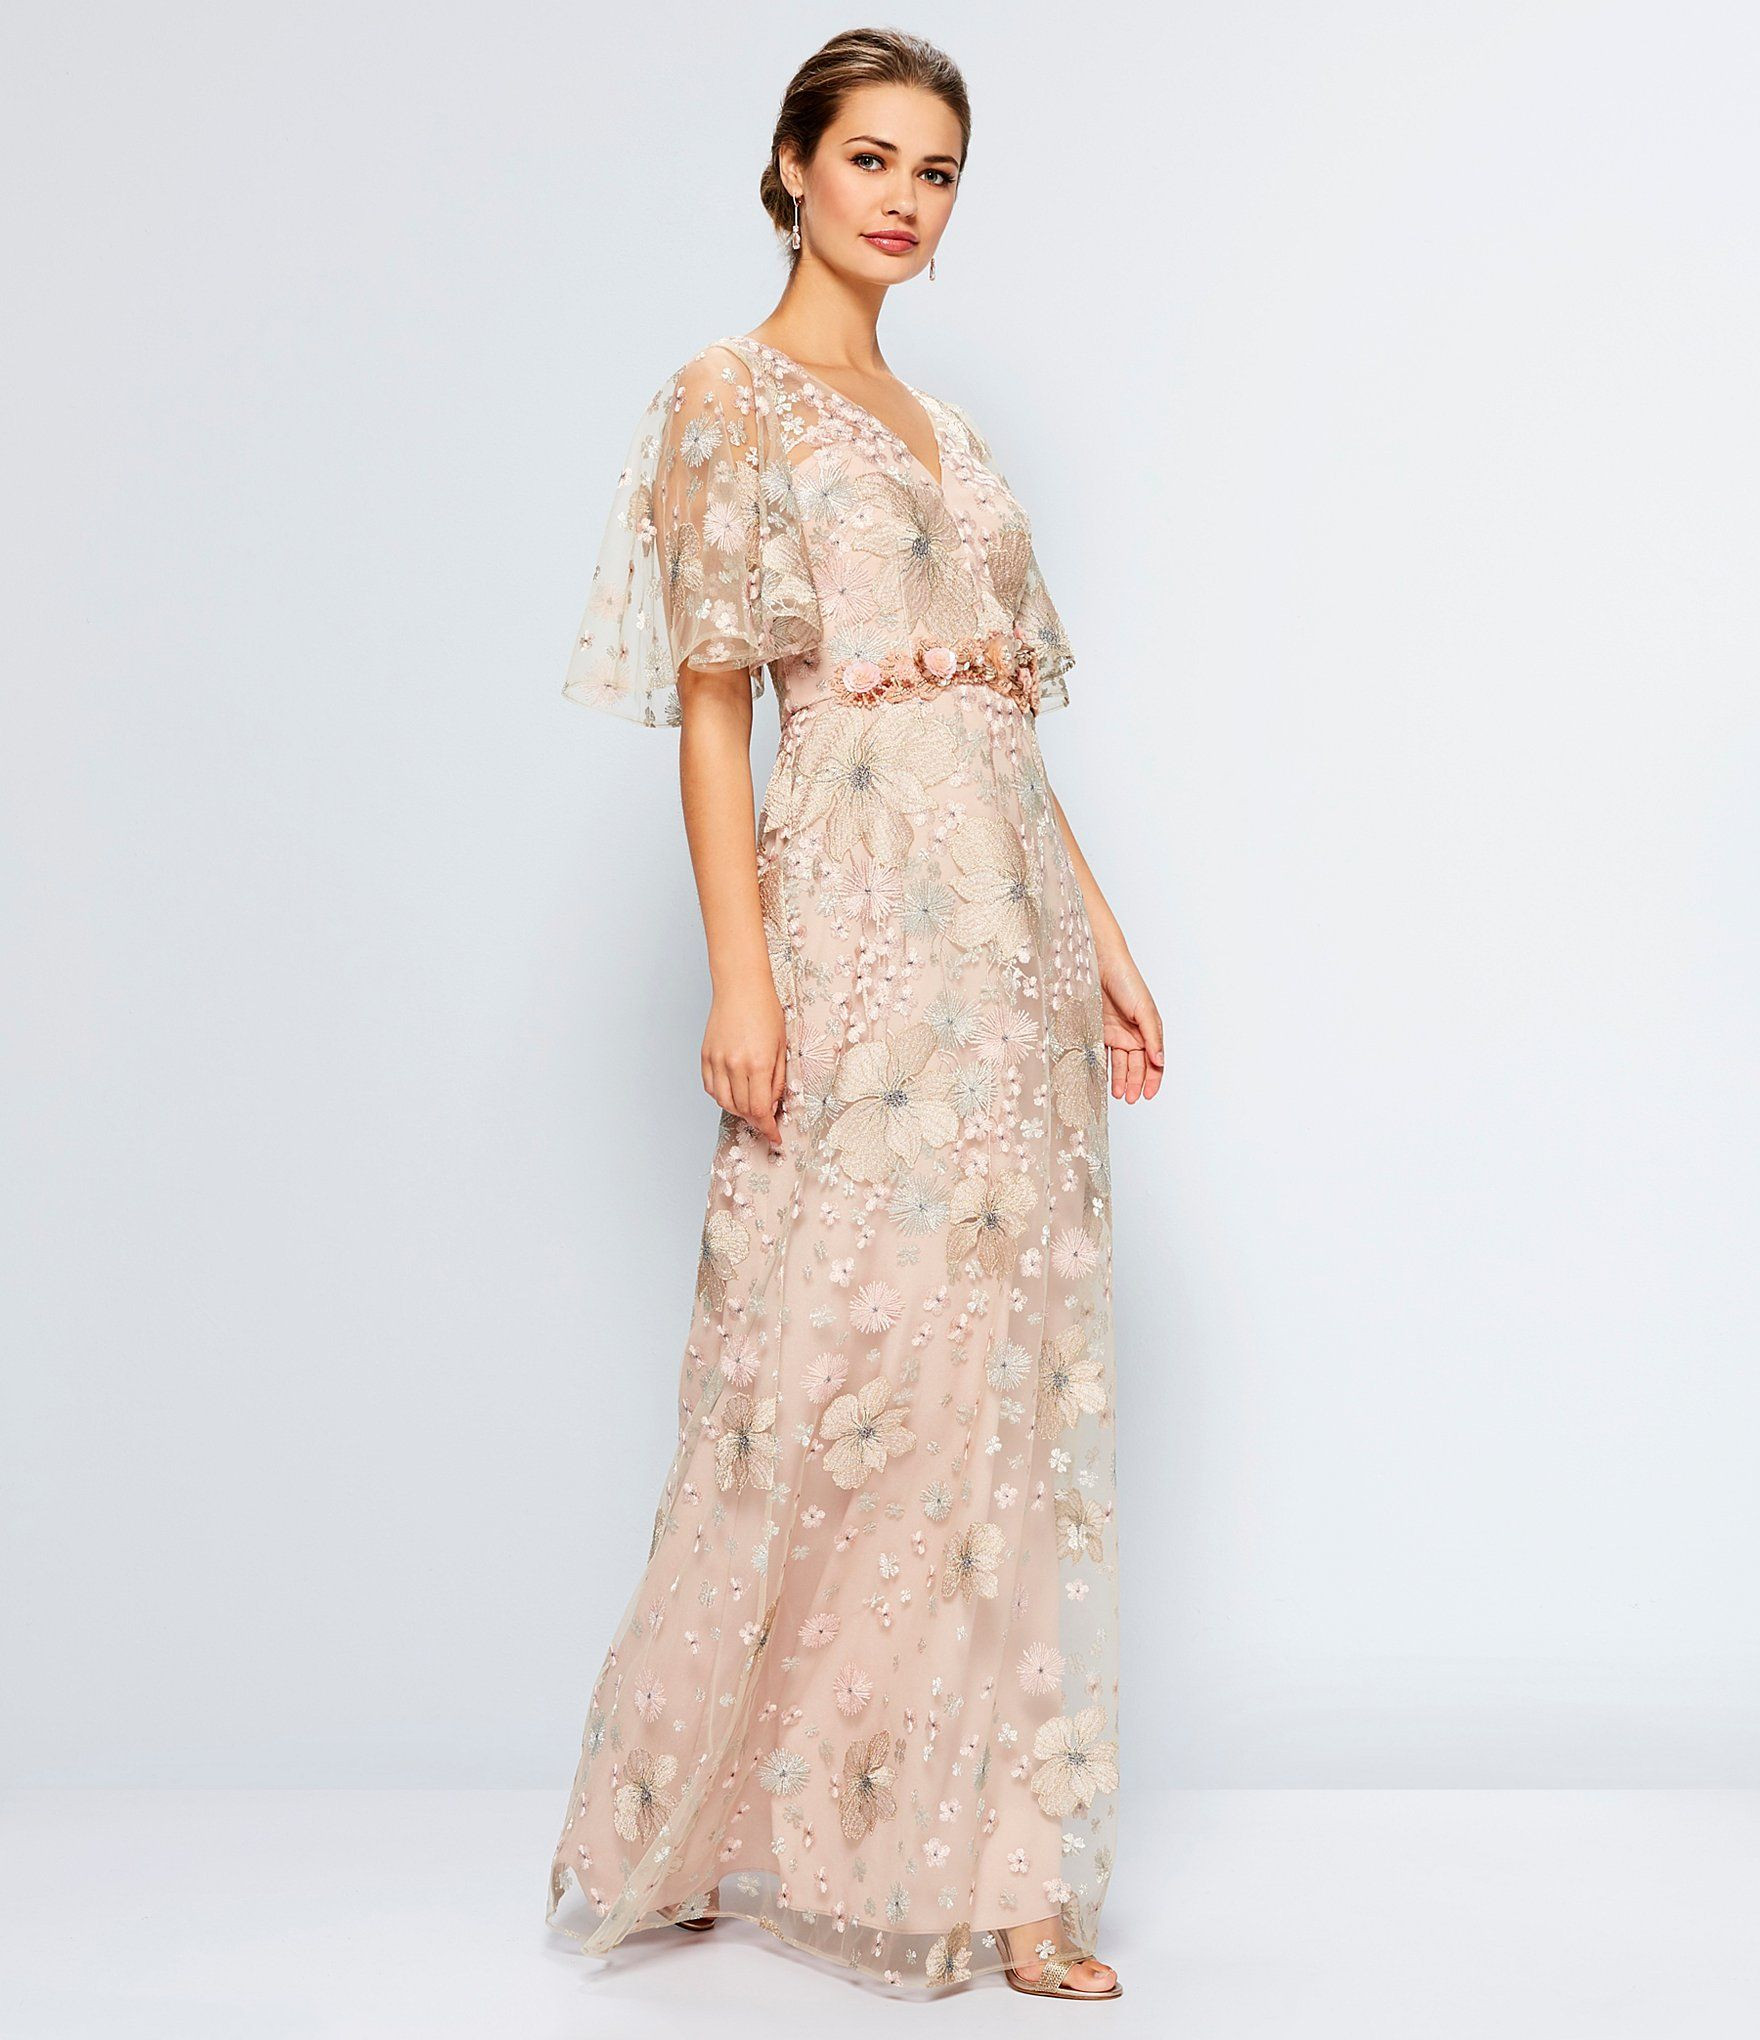 Dillards Wedding Dresses
 David Meister Soft Embroidered Beaded Gown